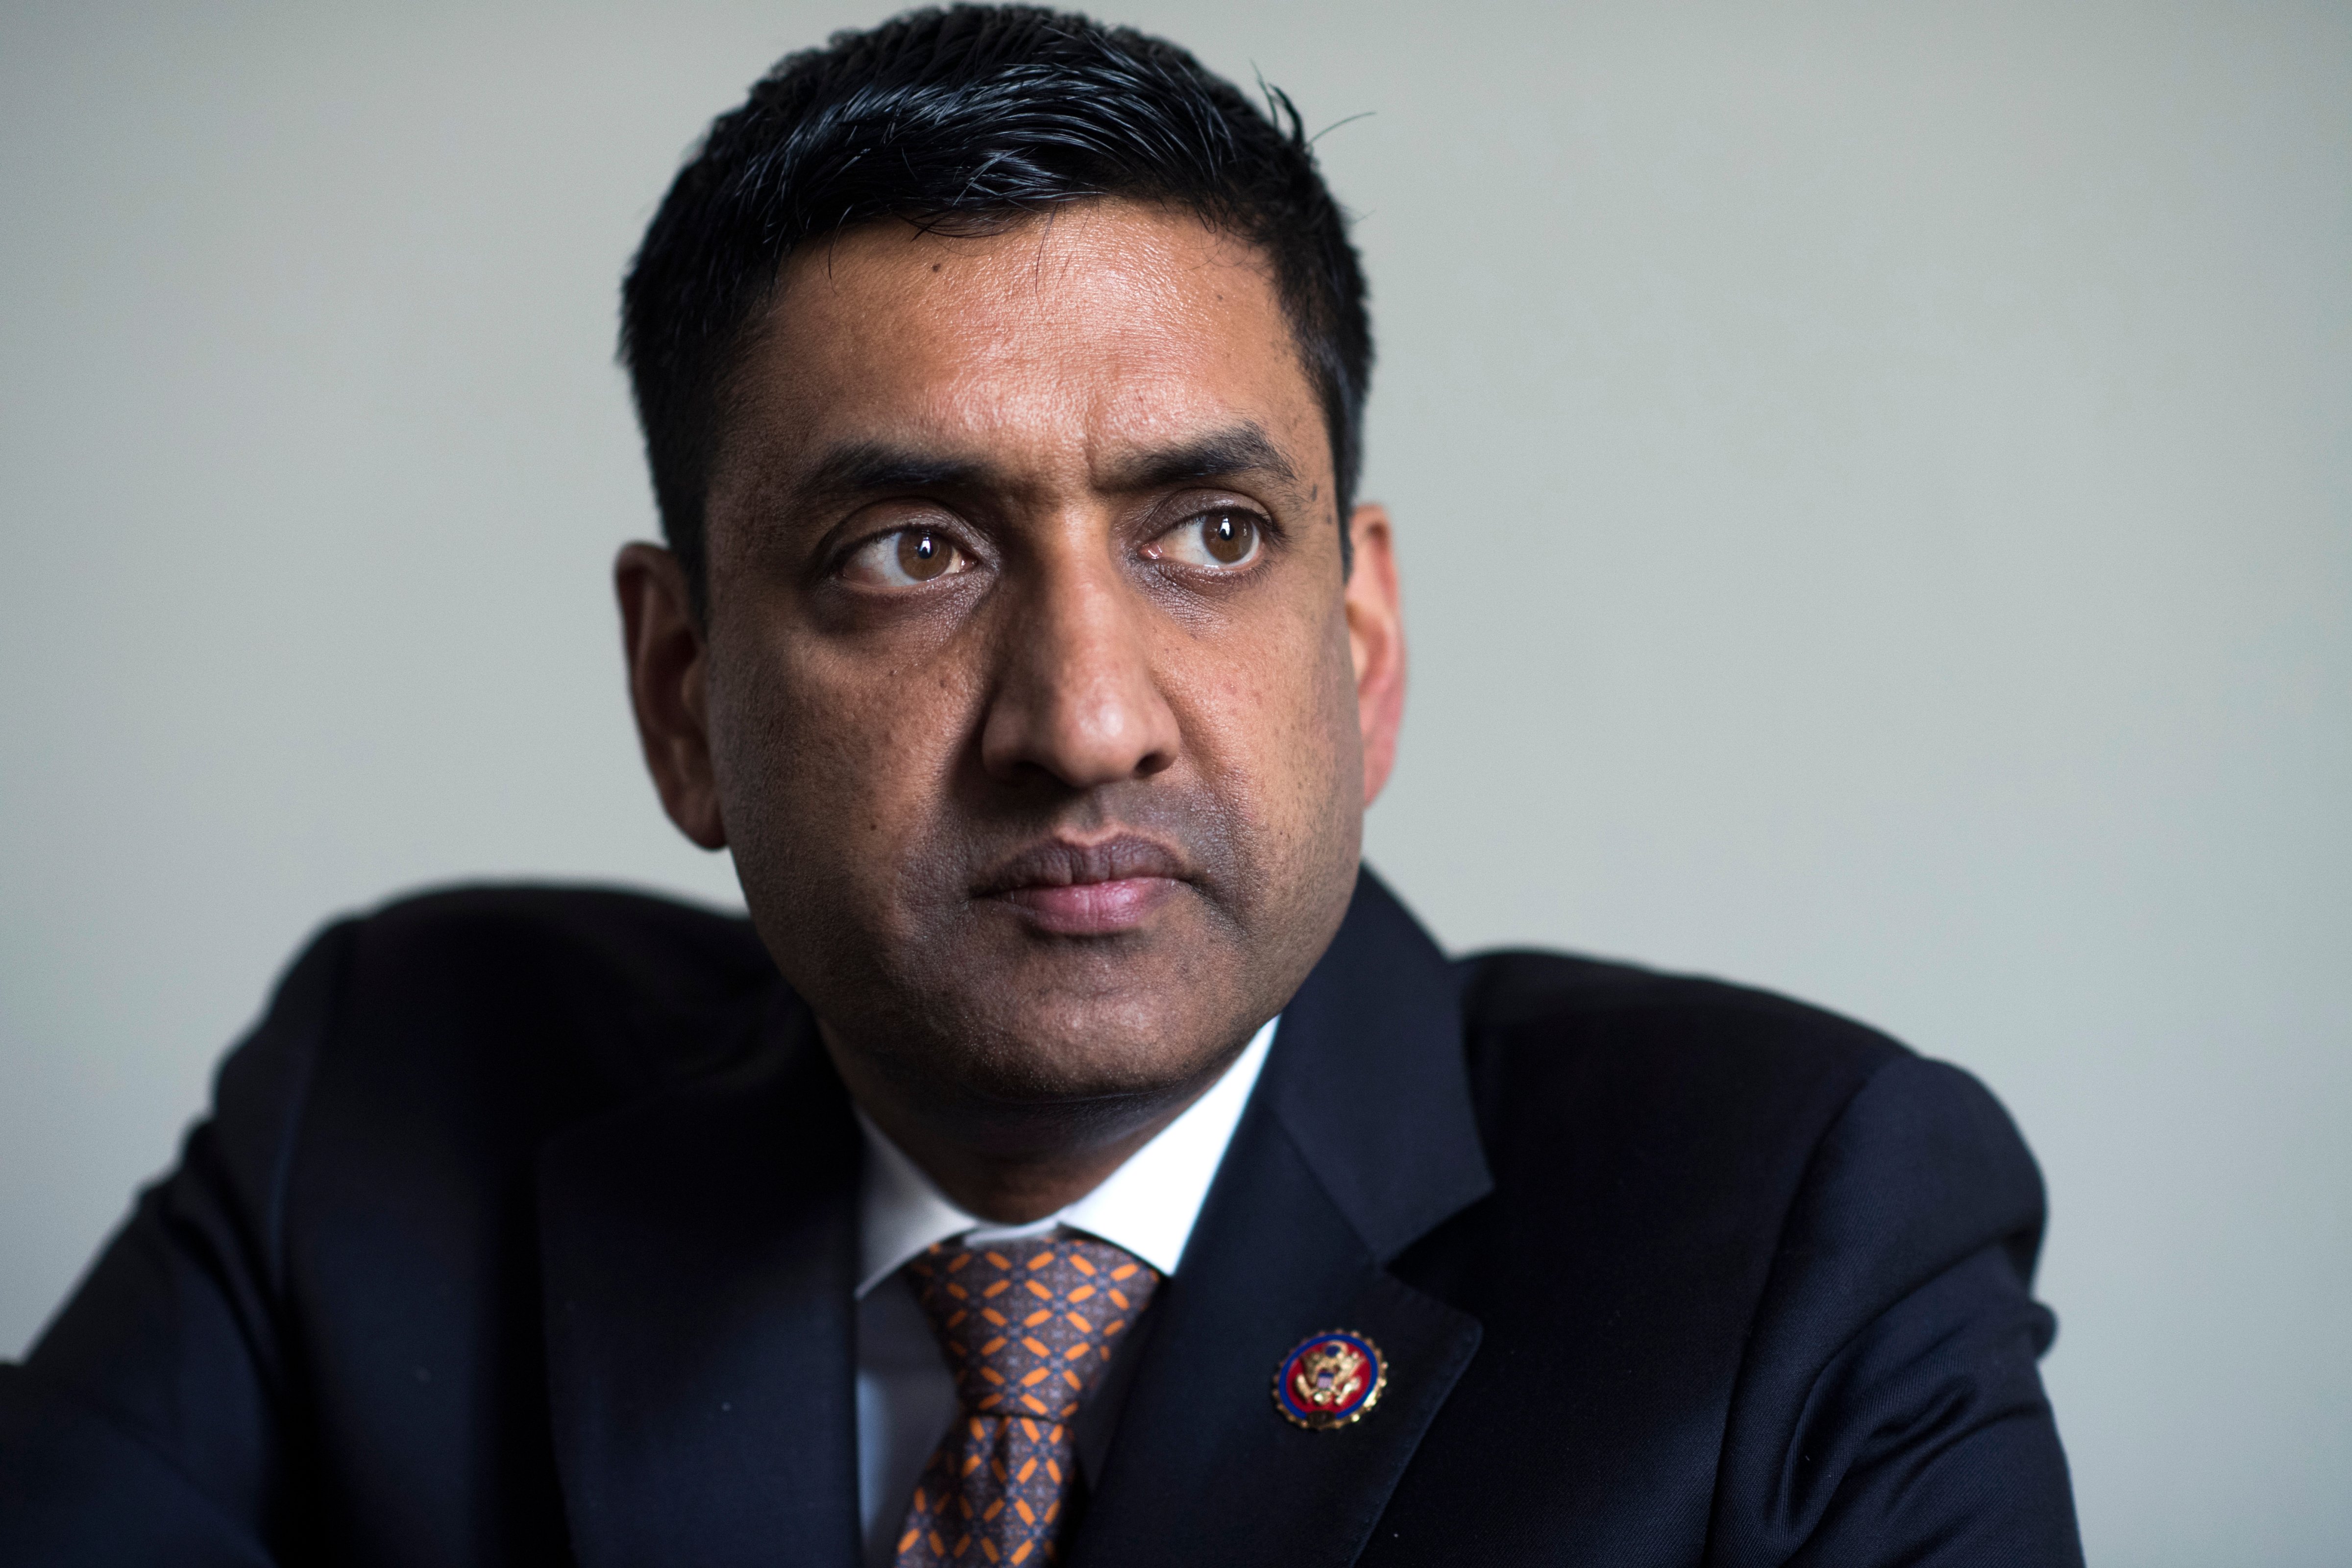 Rep. Ro Khanna, D-Calif., in his Washington, D.C., congressional office on April 10, 2019. (Tom Williams—CQ Roll Call/AP)